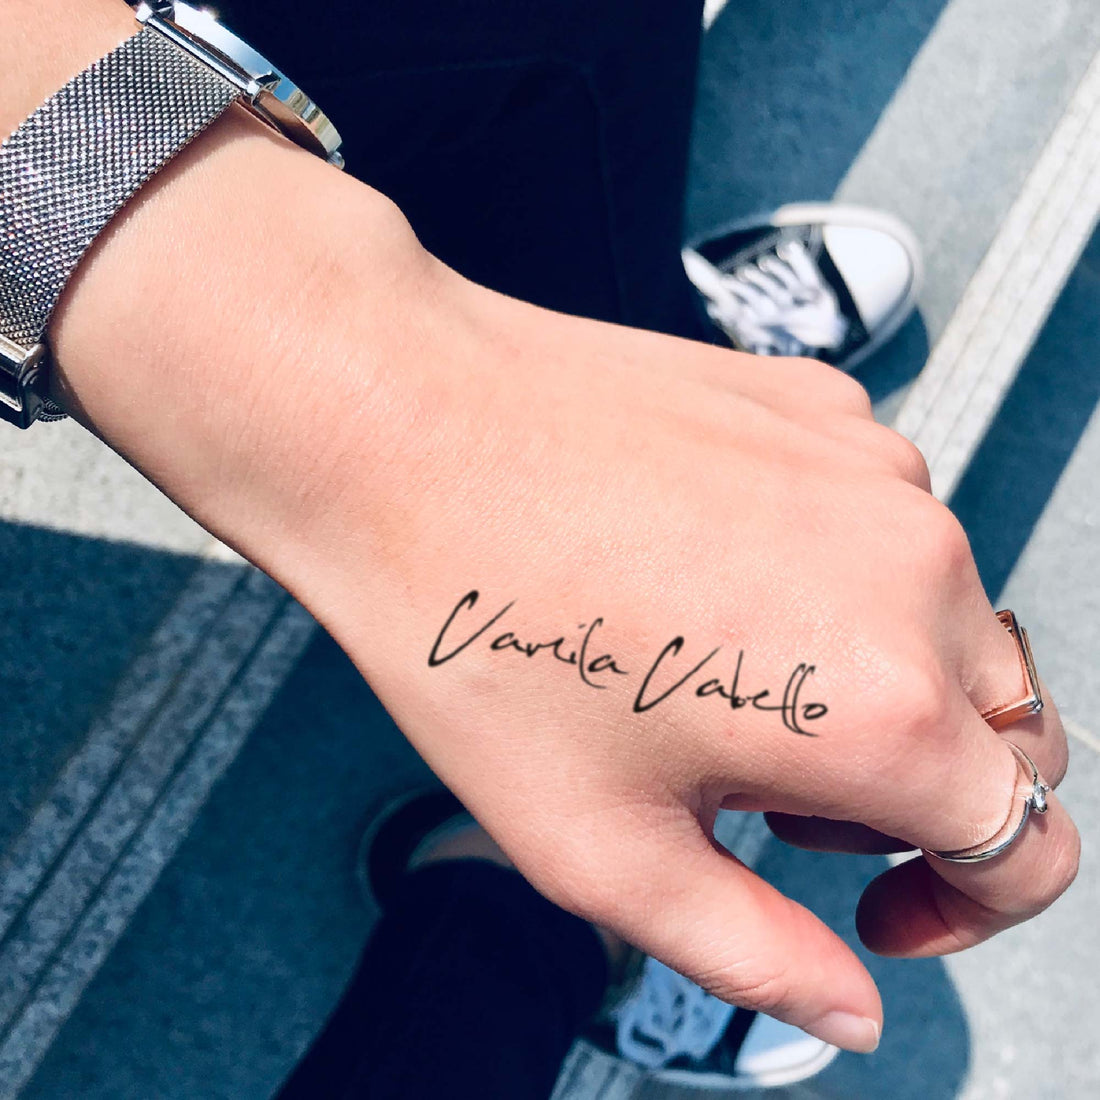 Camila Cabello custom temporary tattoo sticker design idea inspiration meanings removal arm wrist hand words font name signature calligraphy lyrics tour concert outfits merch accessory gift souvenir costumes wear dress up code